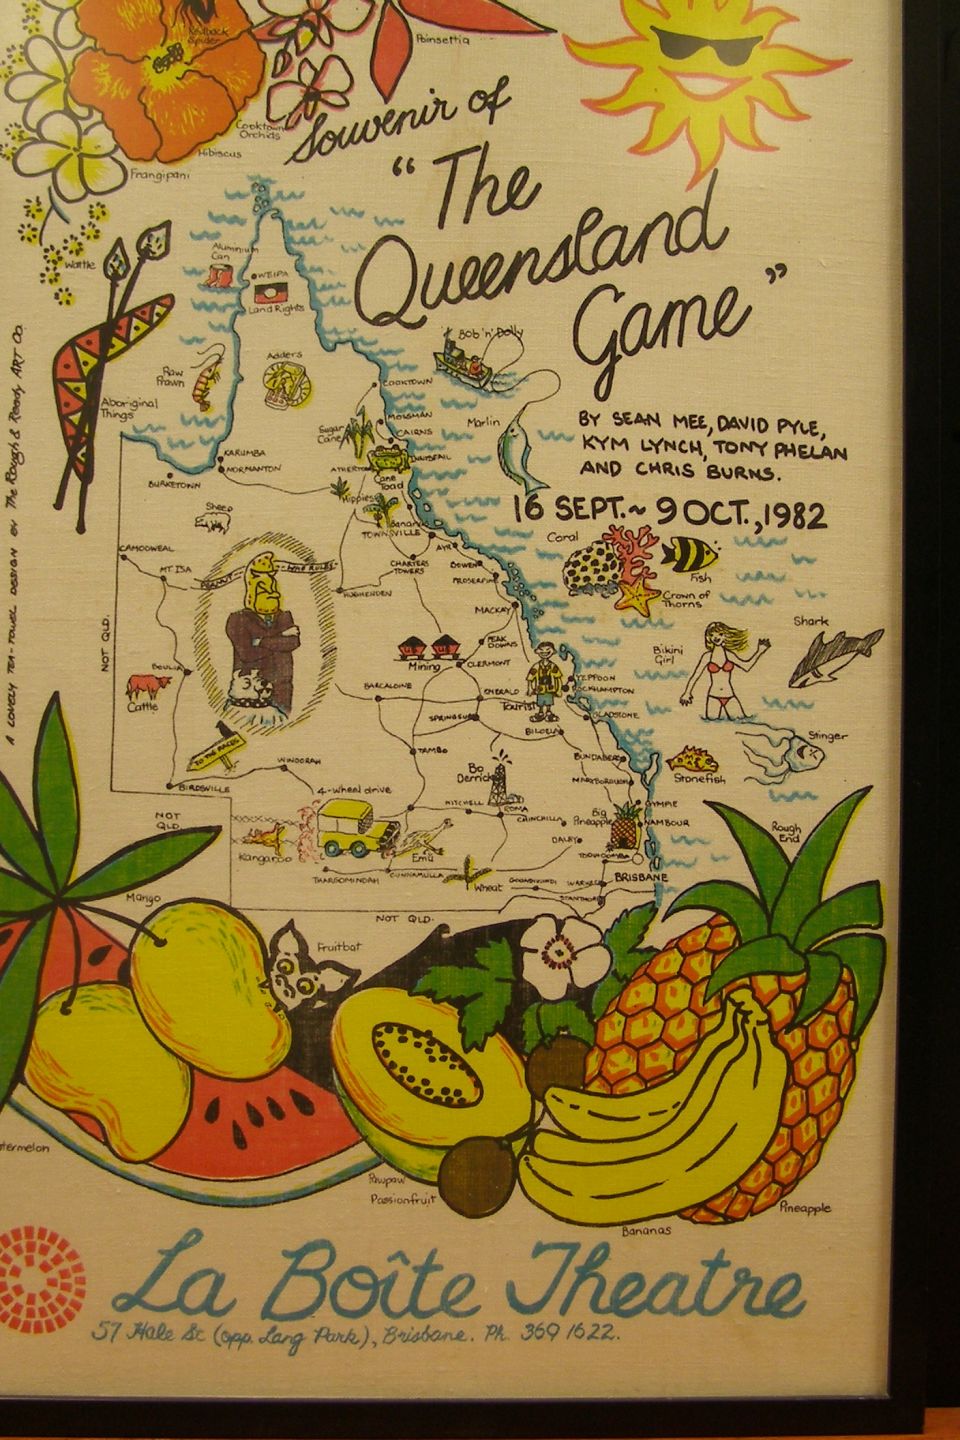 The Queensland Game poster, 1982.